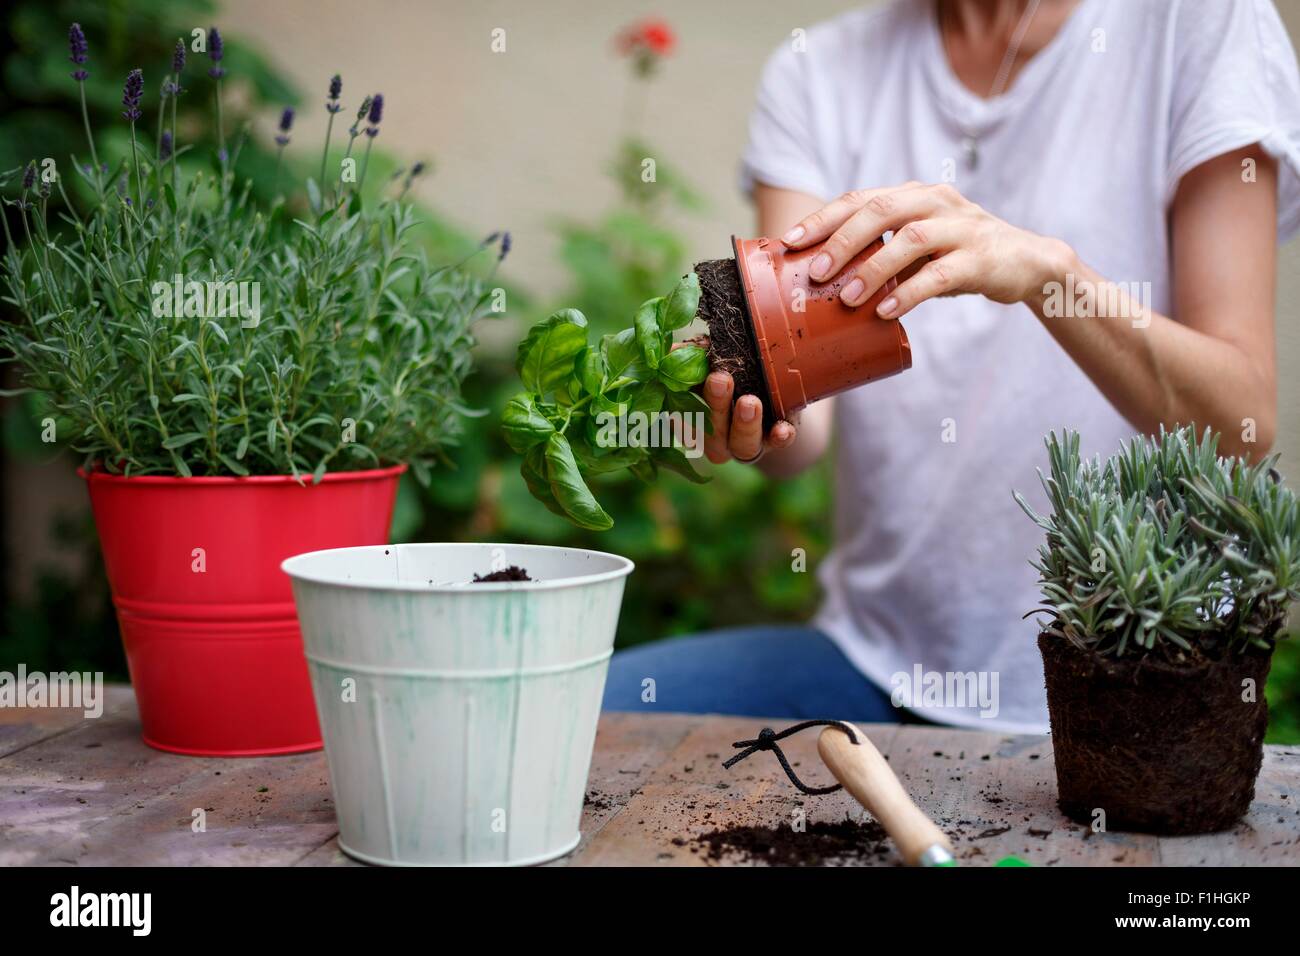 Mid section of mid adult woman potting plants Stock Photo